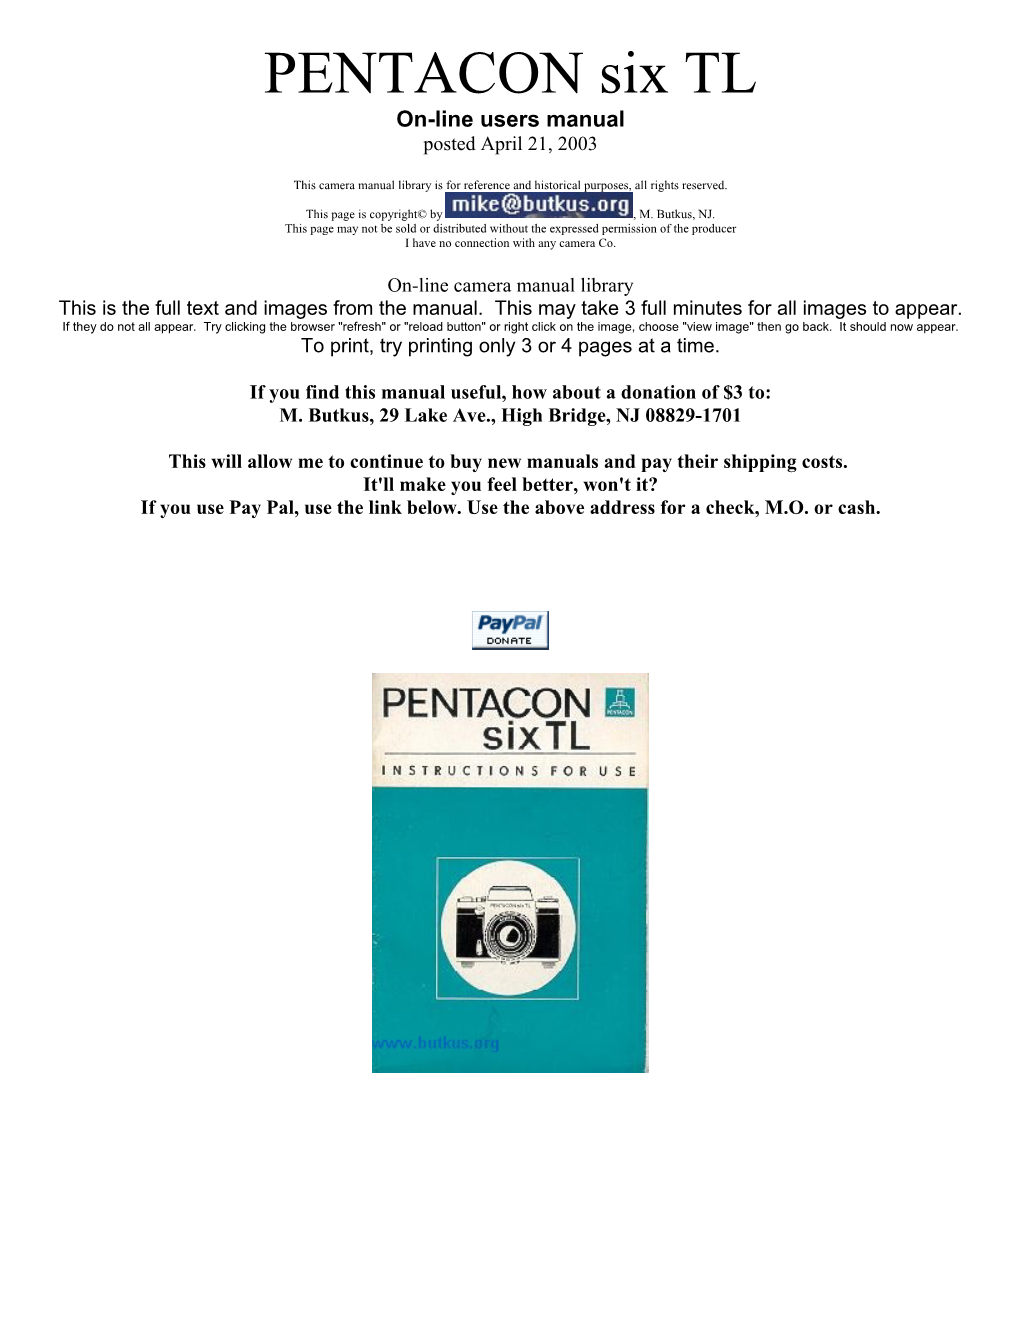 PENTACON Six TL On-Line Users Manual Posted April 21, 2003